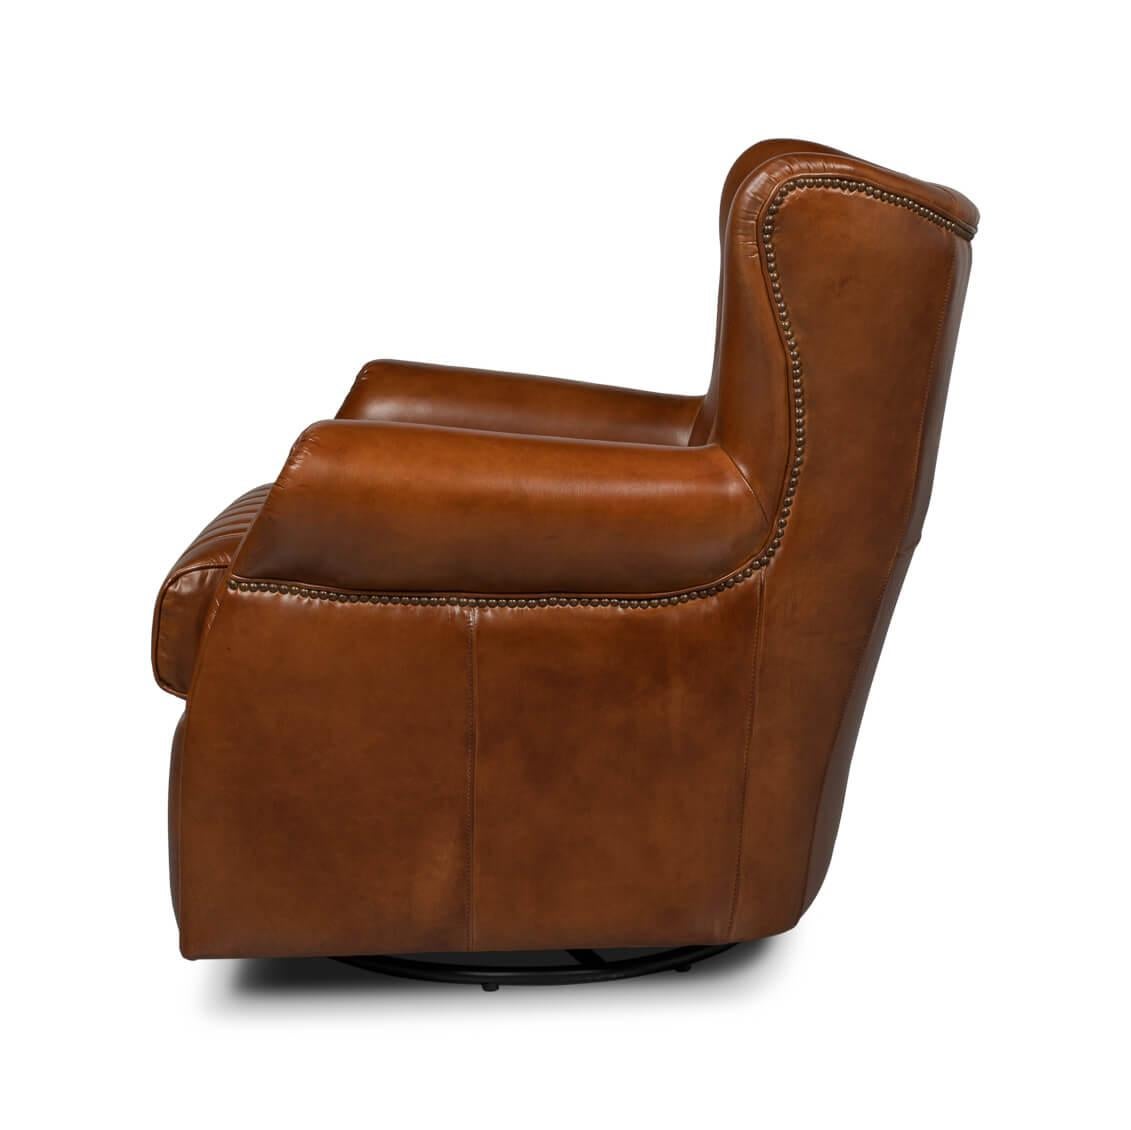 American Classical Classic Medium Brown Leather Swivel Chair For Sale